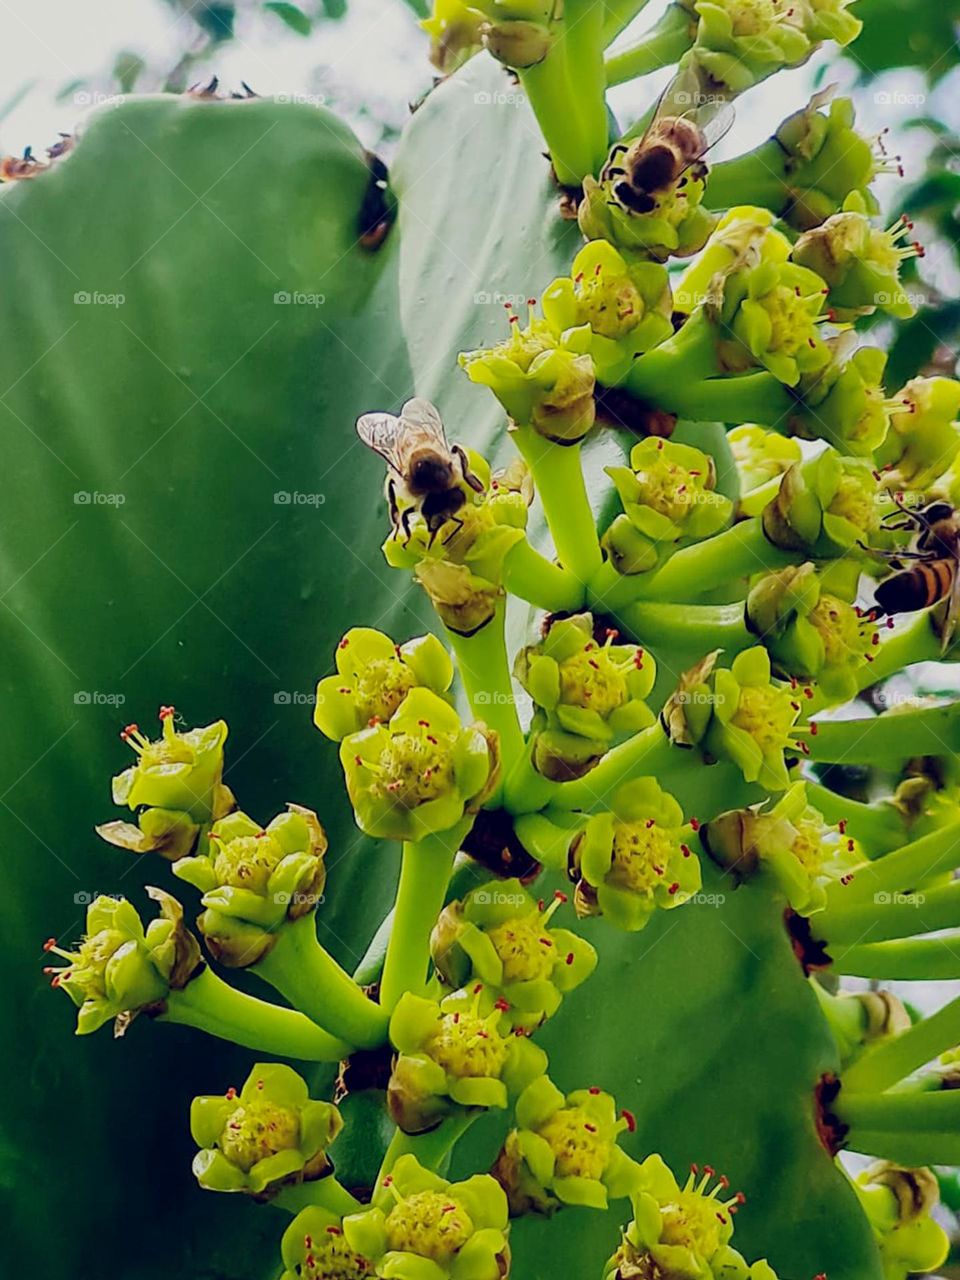 Several bees feed on the sap of the cactus flower